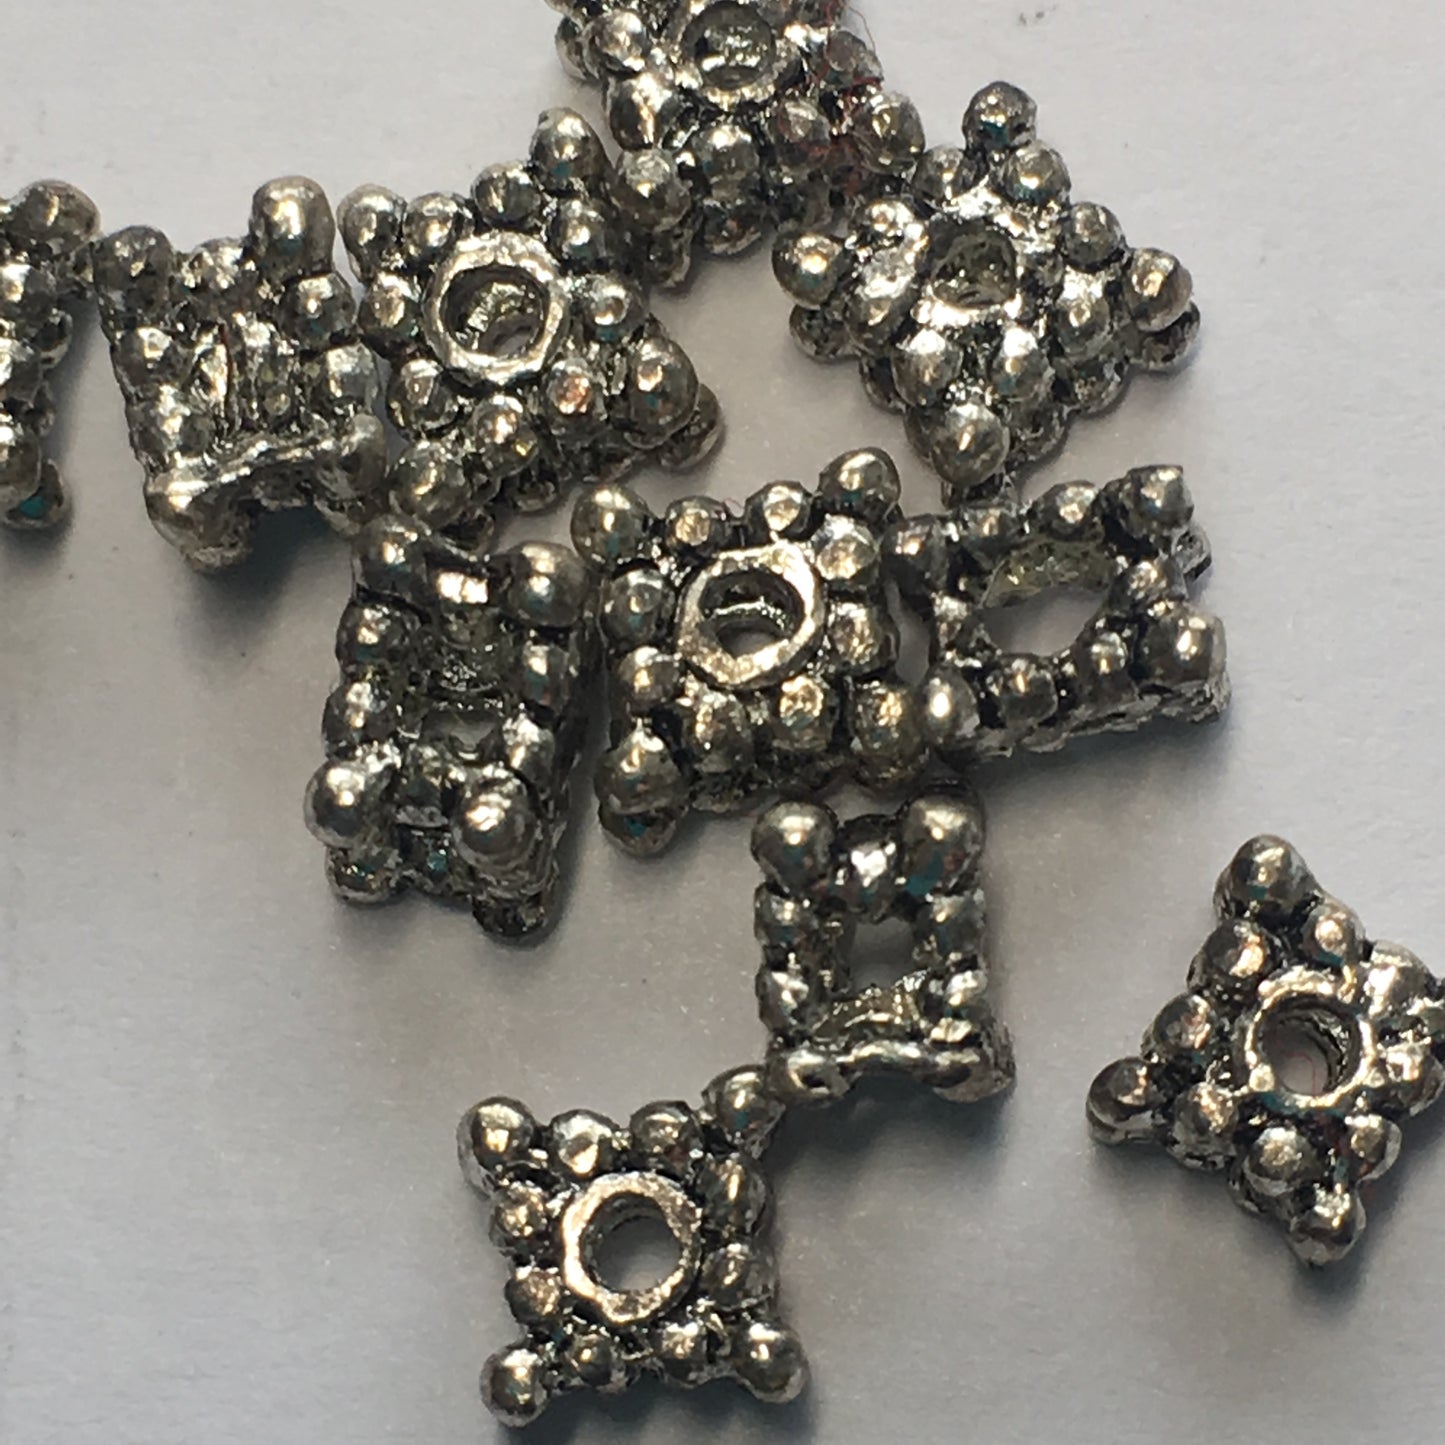 Antique Silver Square Bali Style Spacer Beads, 4 x 5 mm - 11 Beads